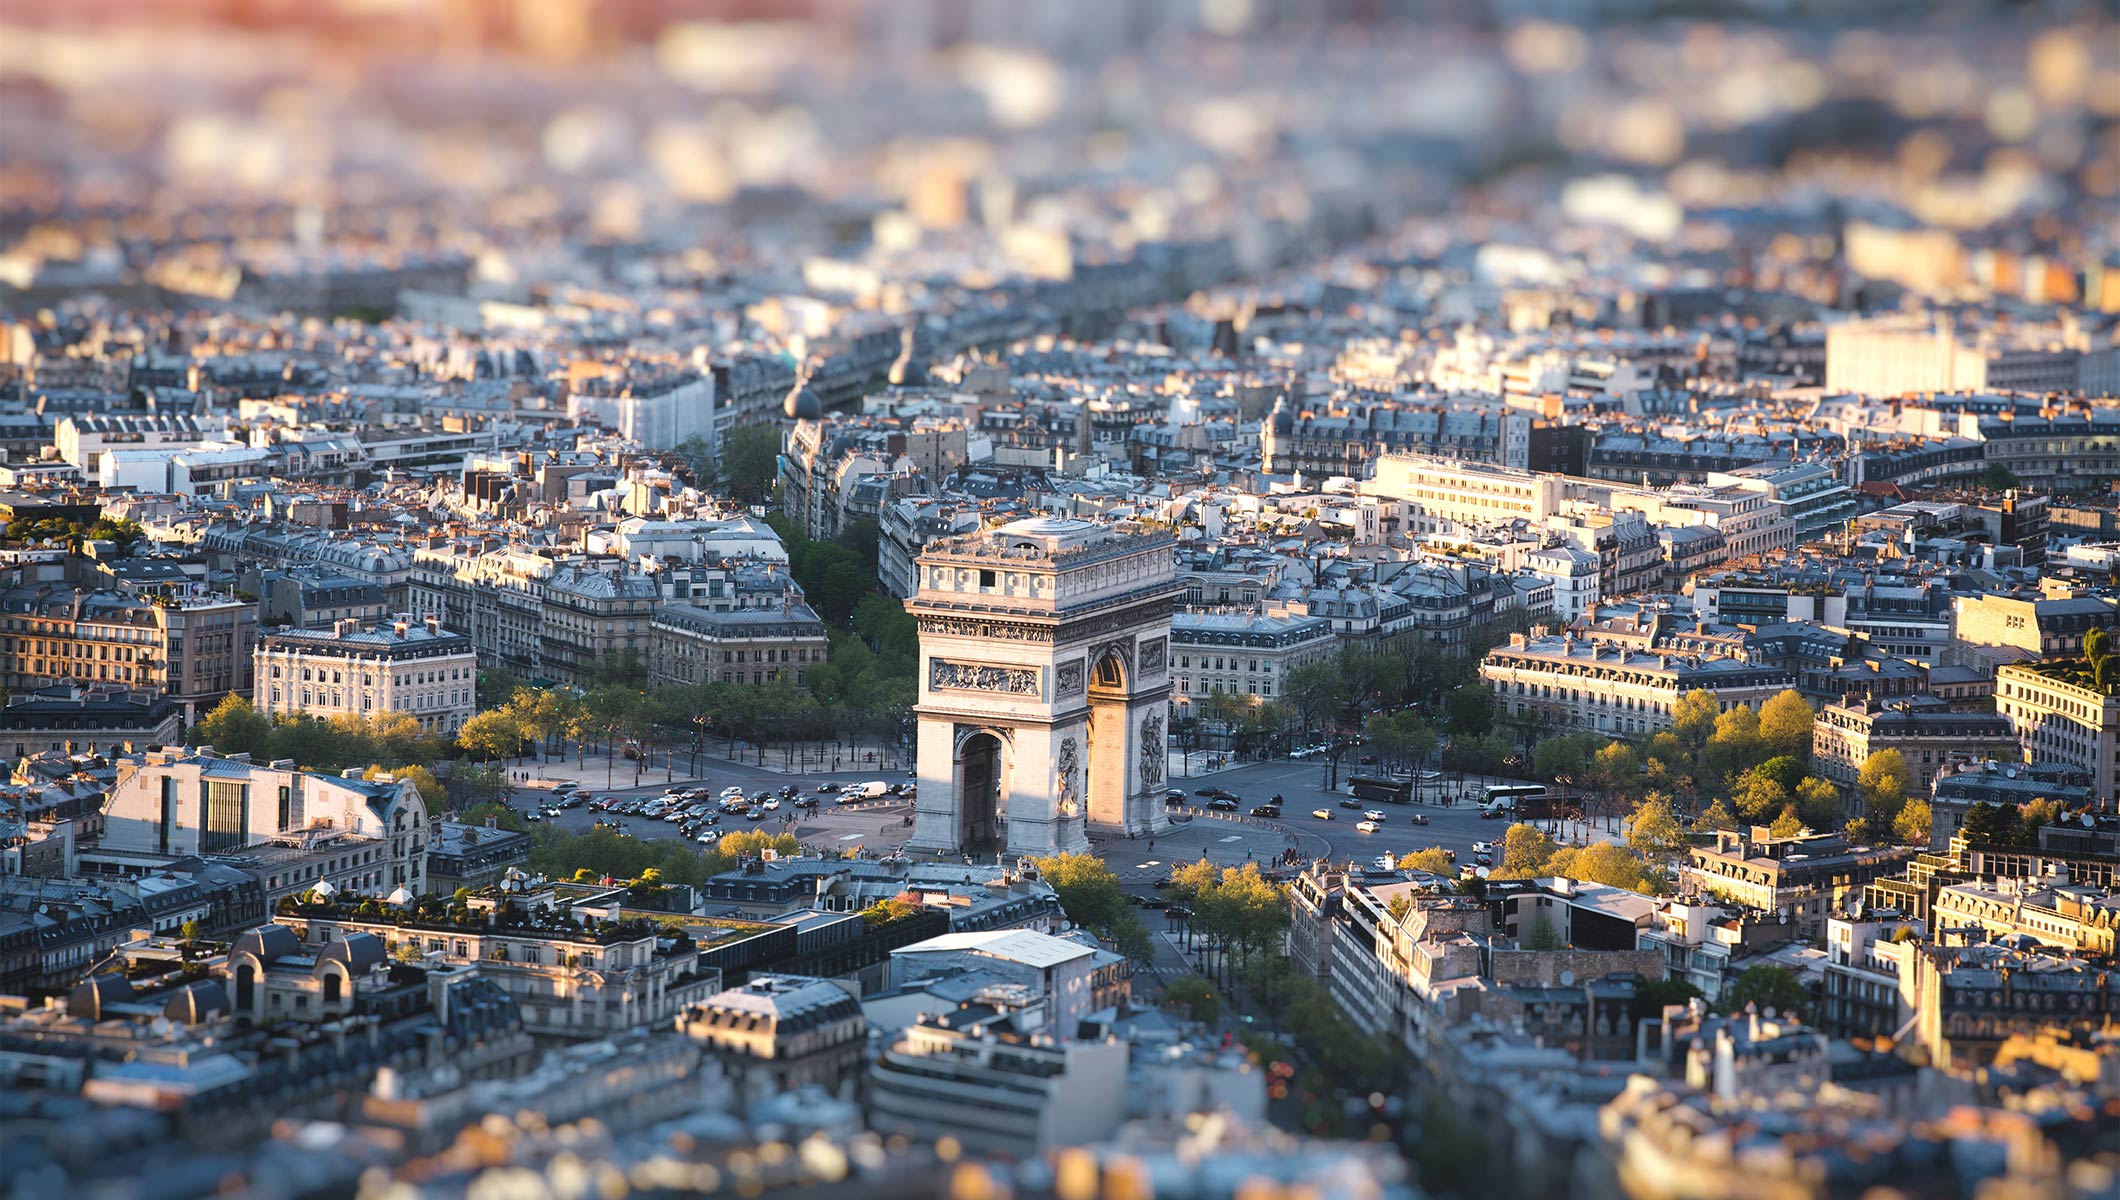 Paris 2024: economically and socially responsible Games - Olympic News